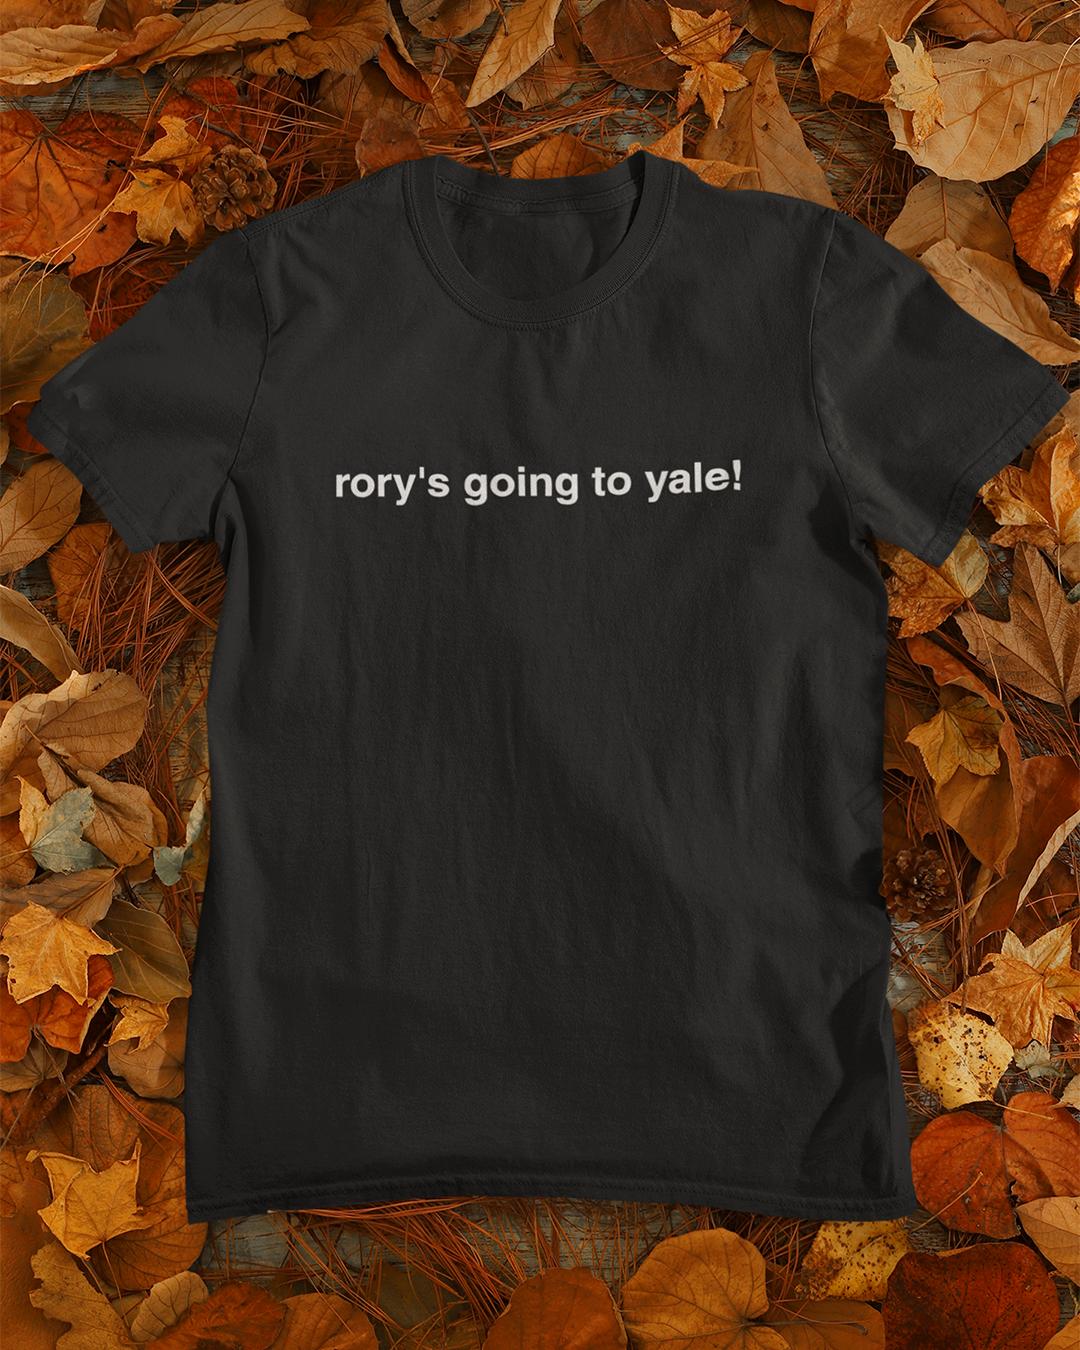 Rory's Going To Yale T-Shirt - Gilmore Girls Inspired T-Shirt - Kirk Gilmore Girls Stars Hollow T-Shirt - Gilmore Girls Inspired T-Shirt 